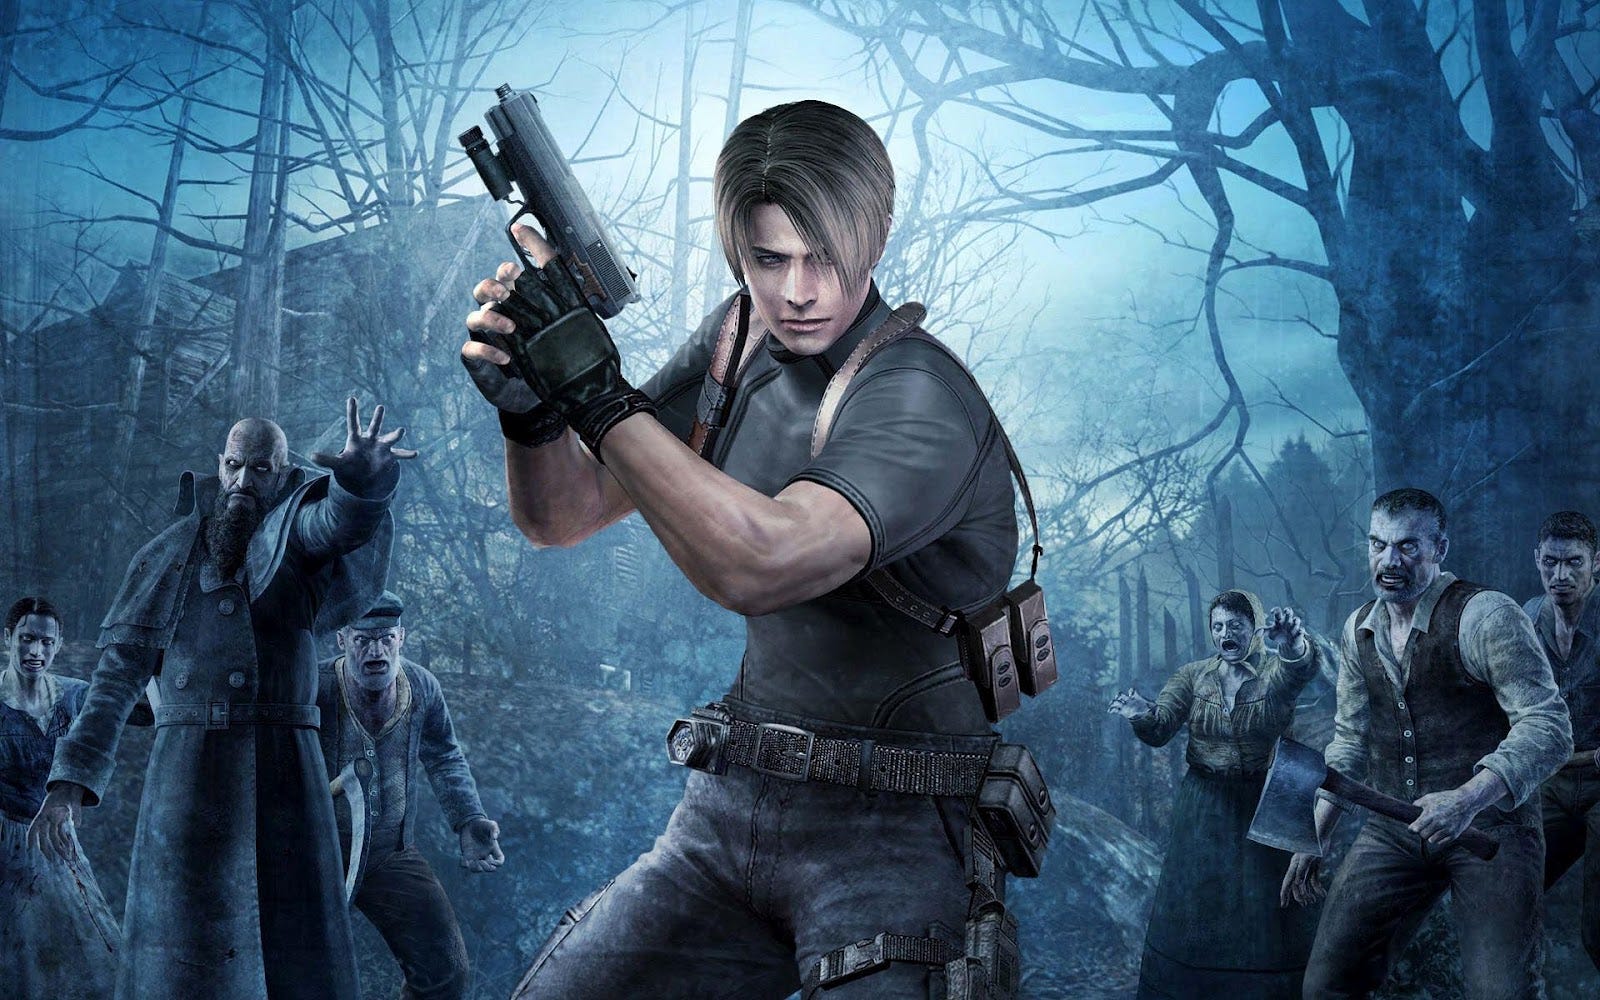 Beperking Zware vrachtwagen wasmiddel Have a look at Resident Evil 4 gameplay on PS4 and Xbox One | VG247